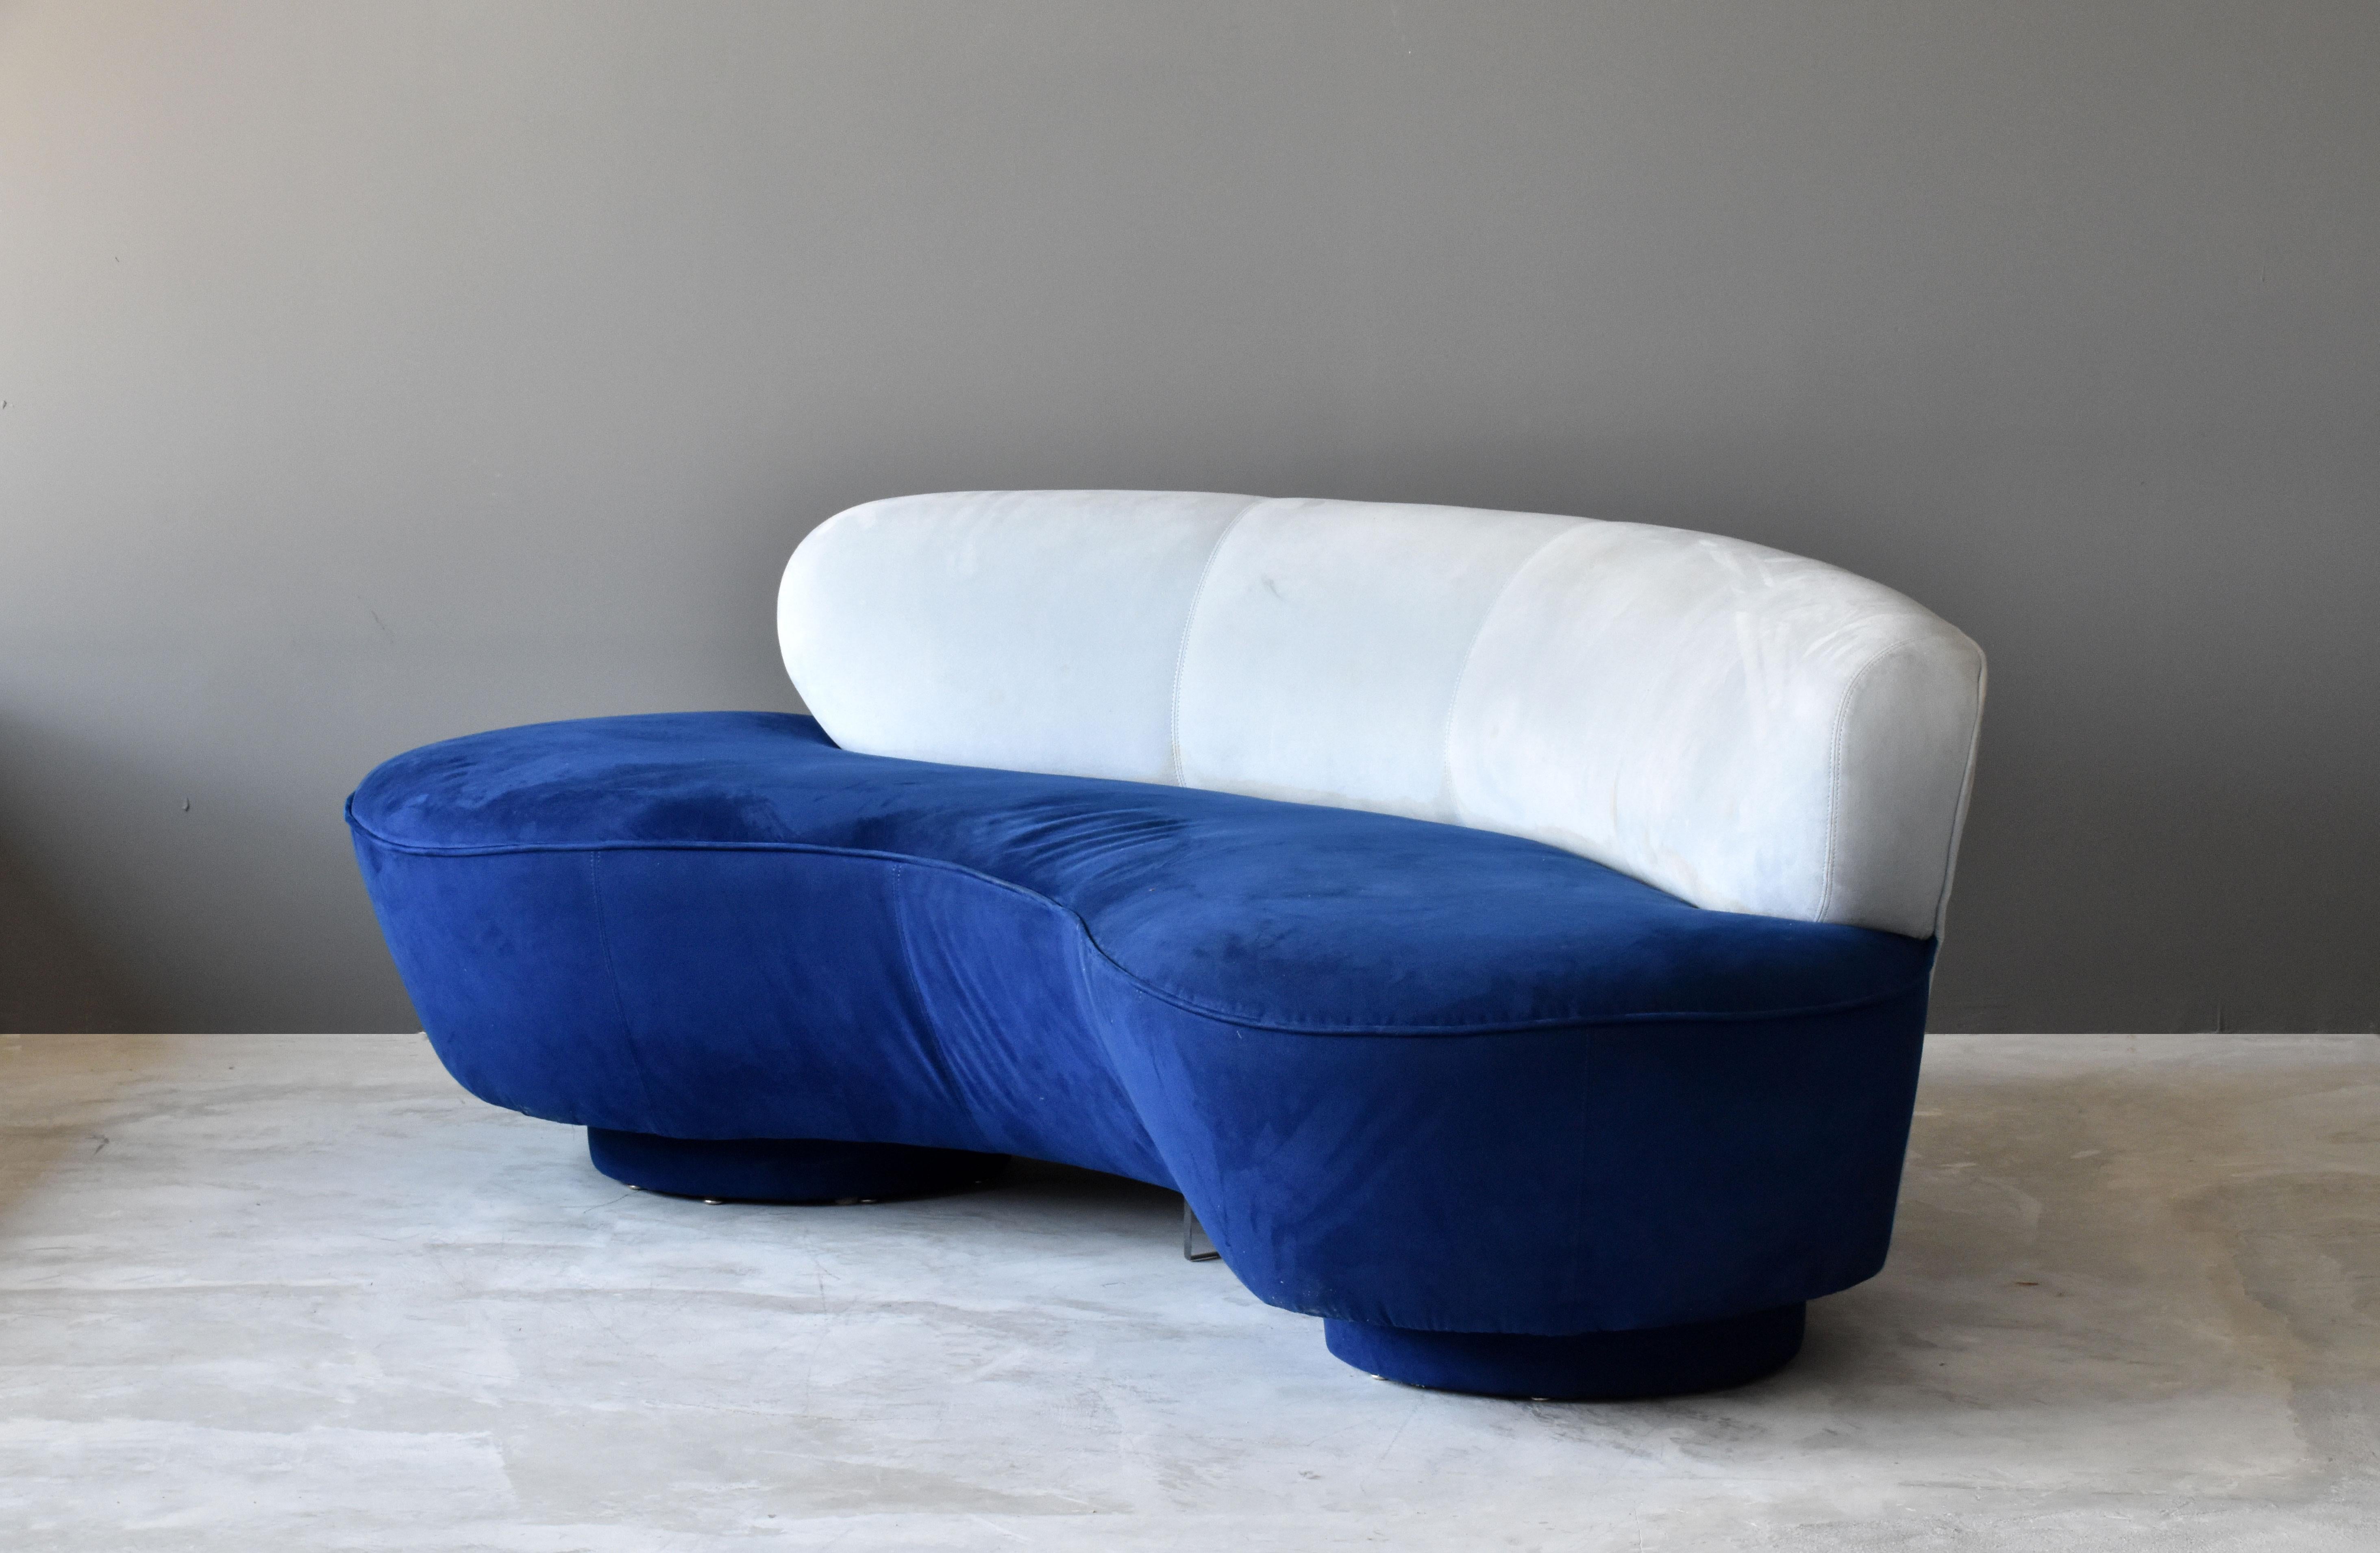 A curved serpentine sofa by Vladimir Kagan. In it's original suede fabric. Form referencing the early organic design movement. Executed by Directional.

    

    